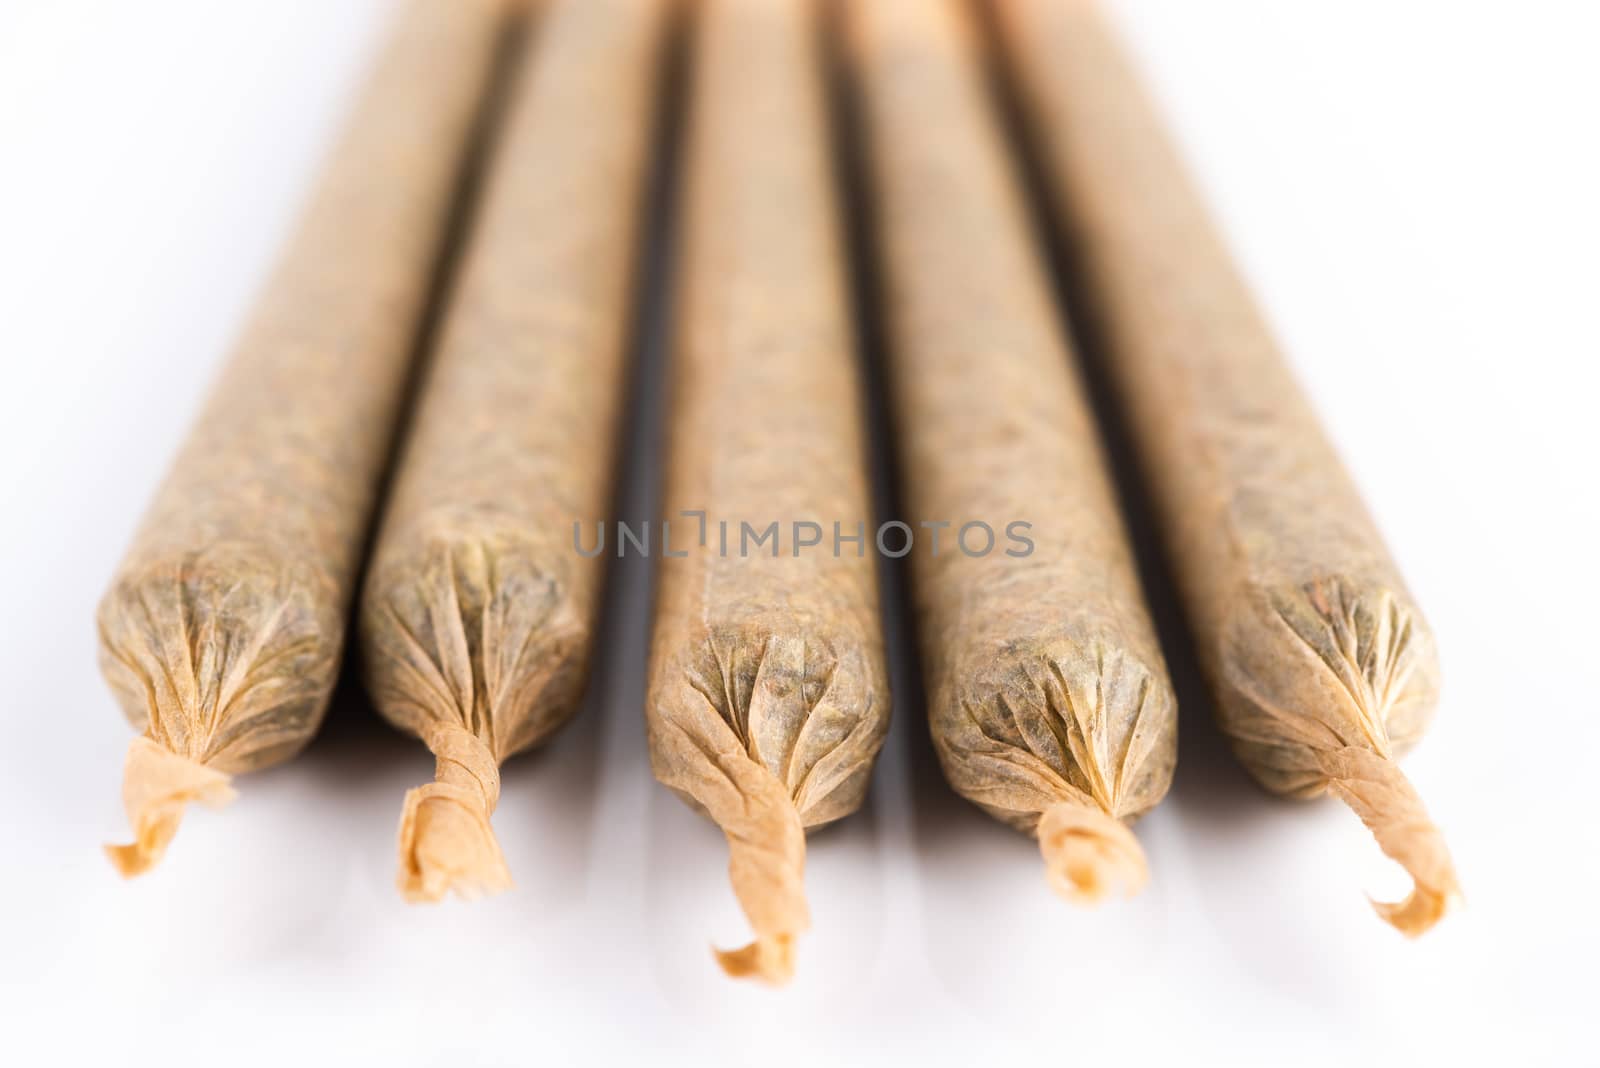 Medical Cannabis Marijuana Joints on White Background, Close Up View.